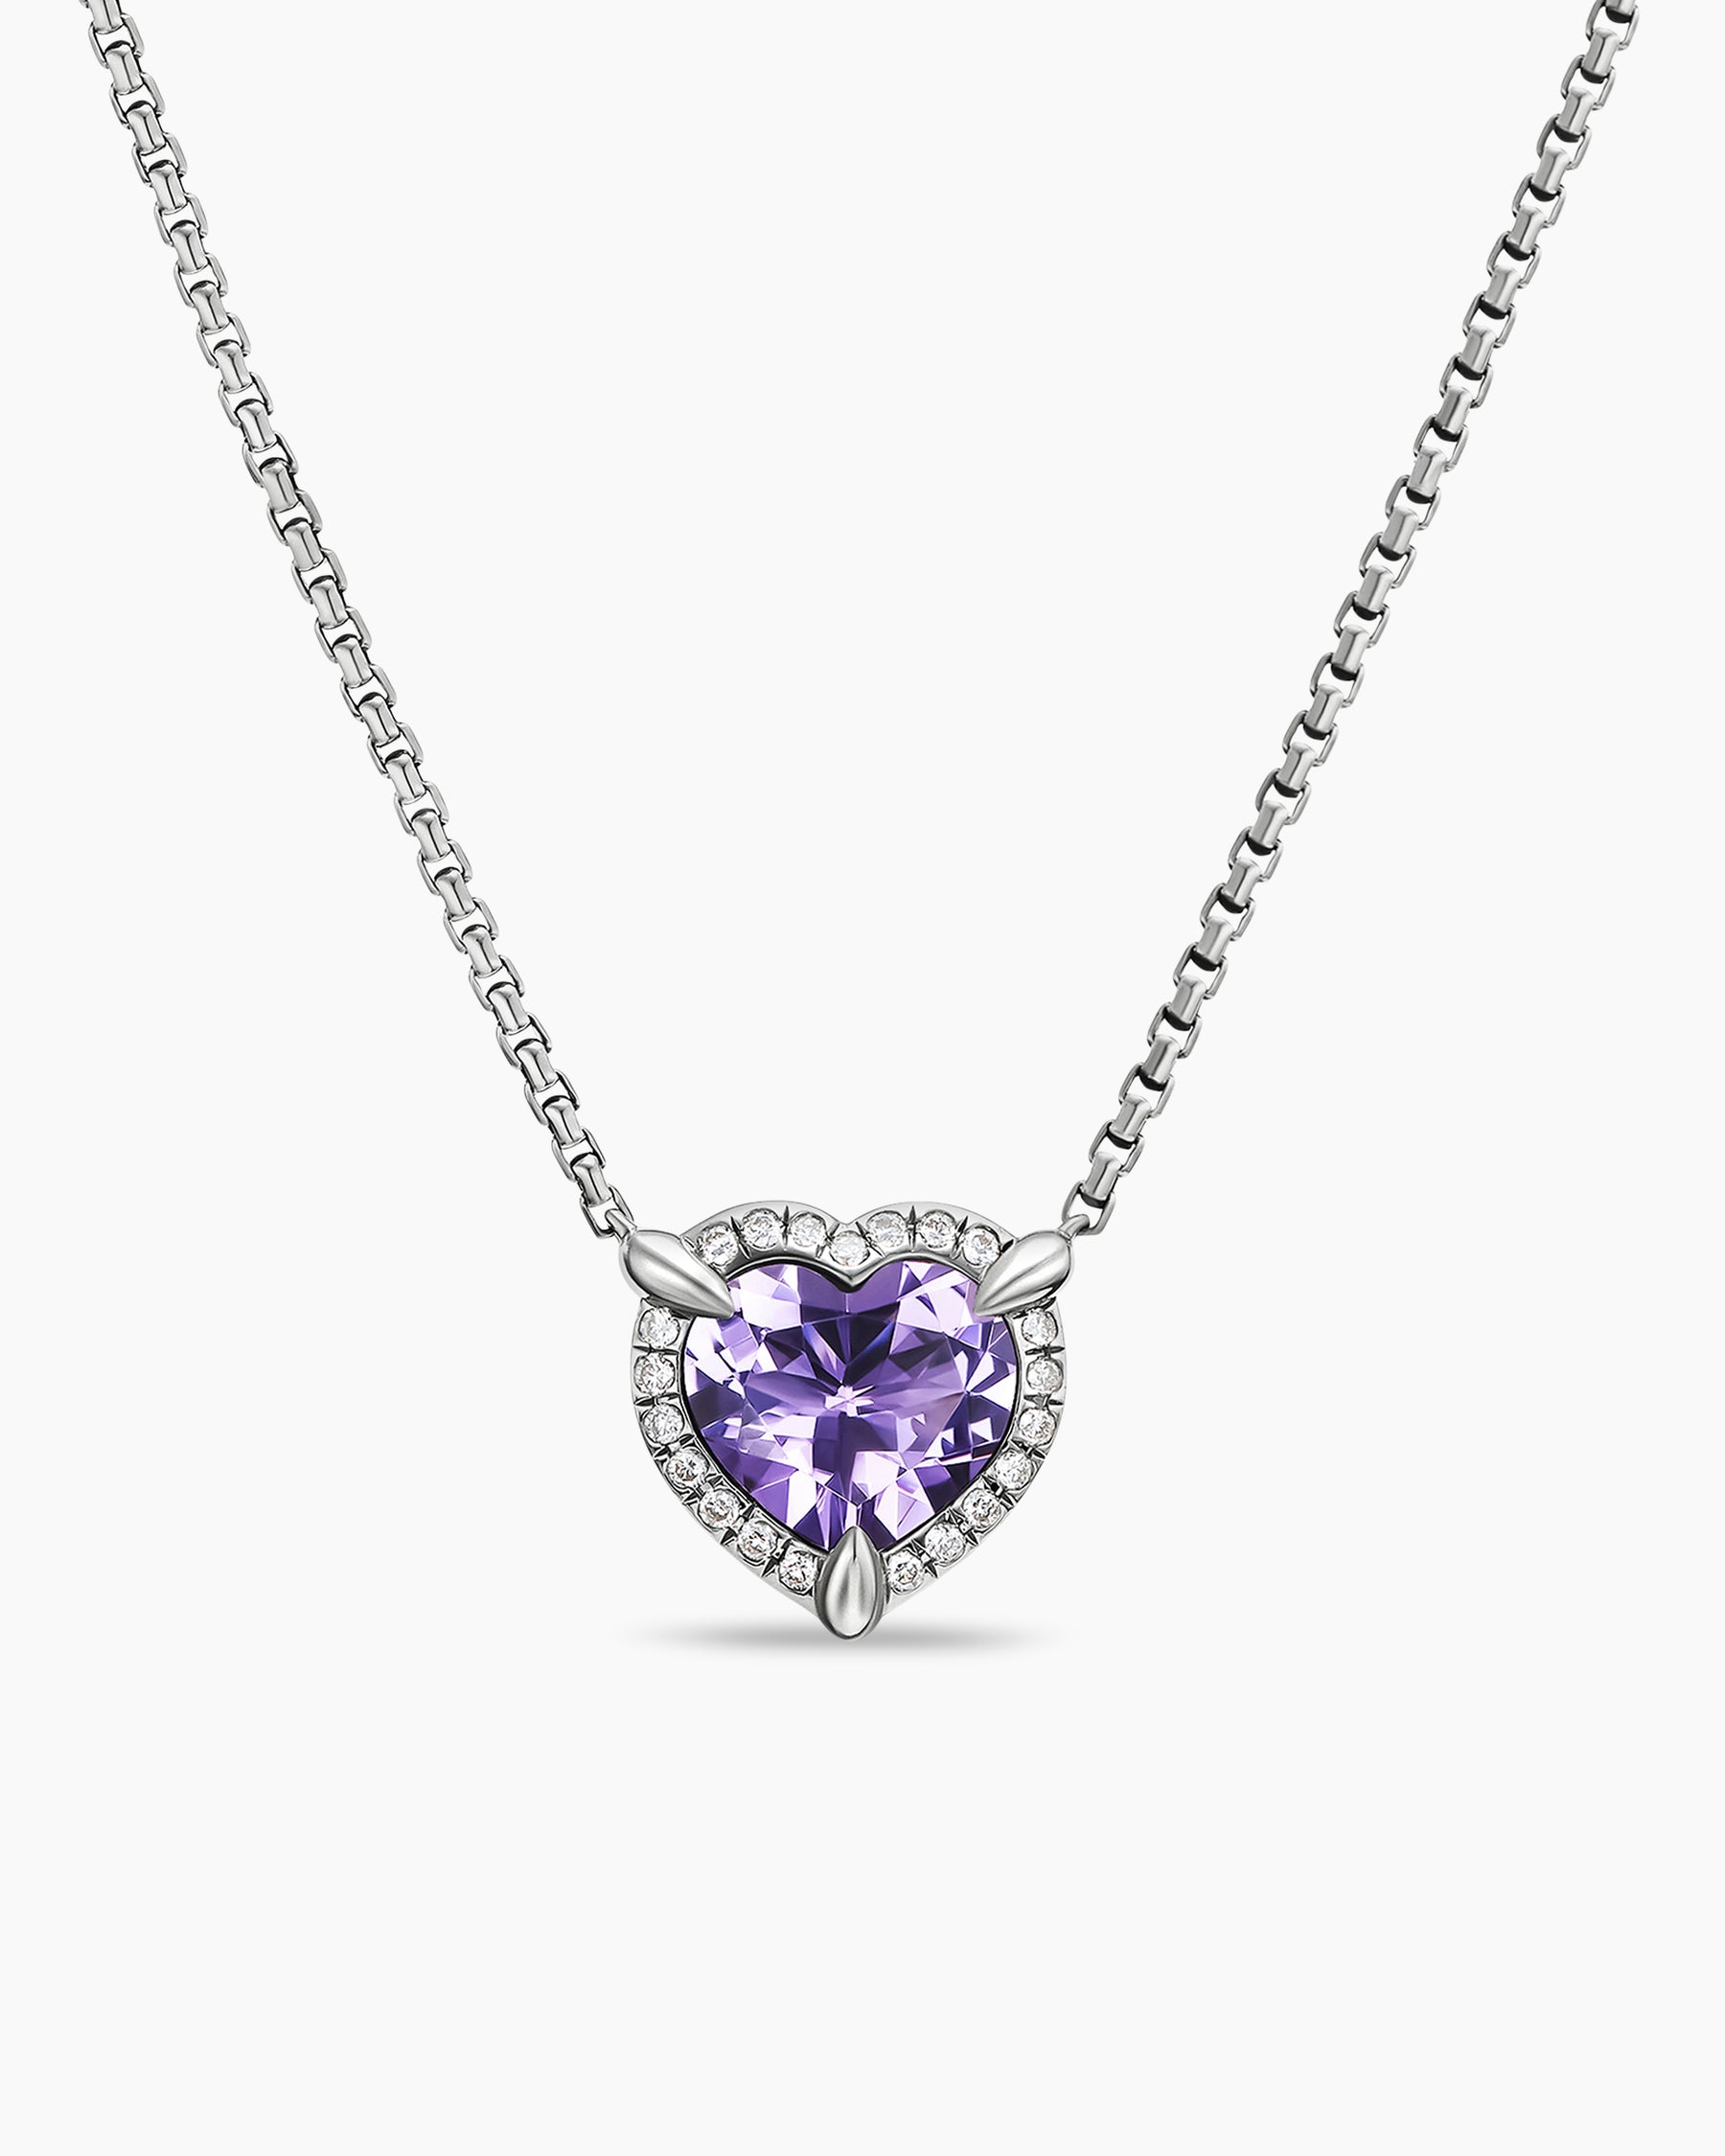 Chatelaine® Heart Pendant Necklace in Sterling Silver with Amethyst and  Diamonds, 10.3mm | David Yurman